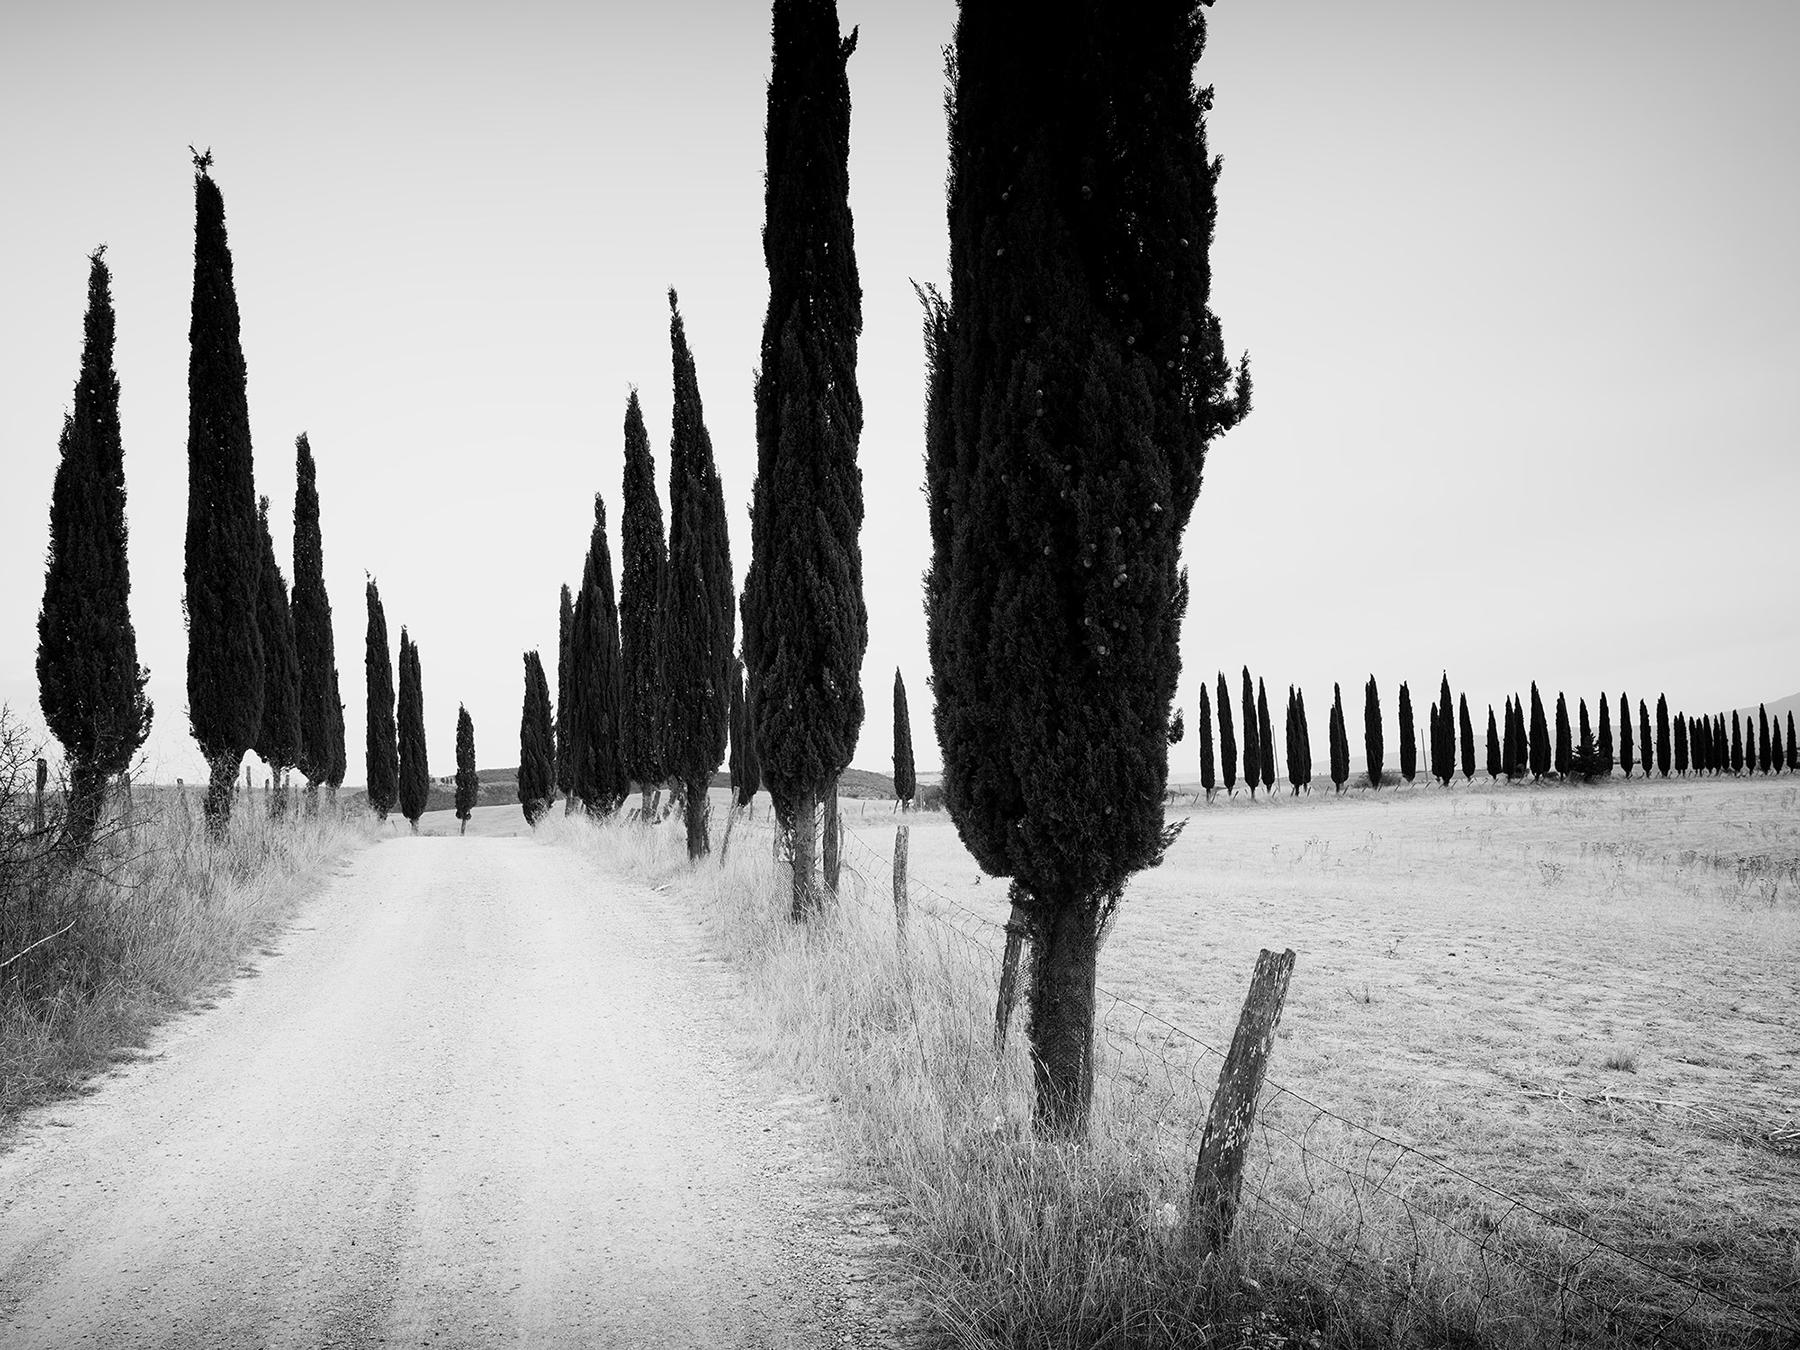 Gerald Berghammer Landscape Photograph - Cypress Tree Avenue, Tuscany, Italy, black and white photography, art landscape